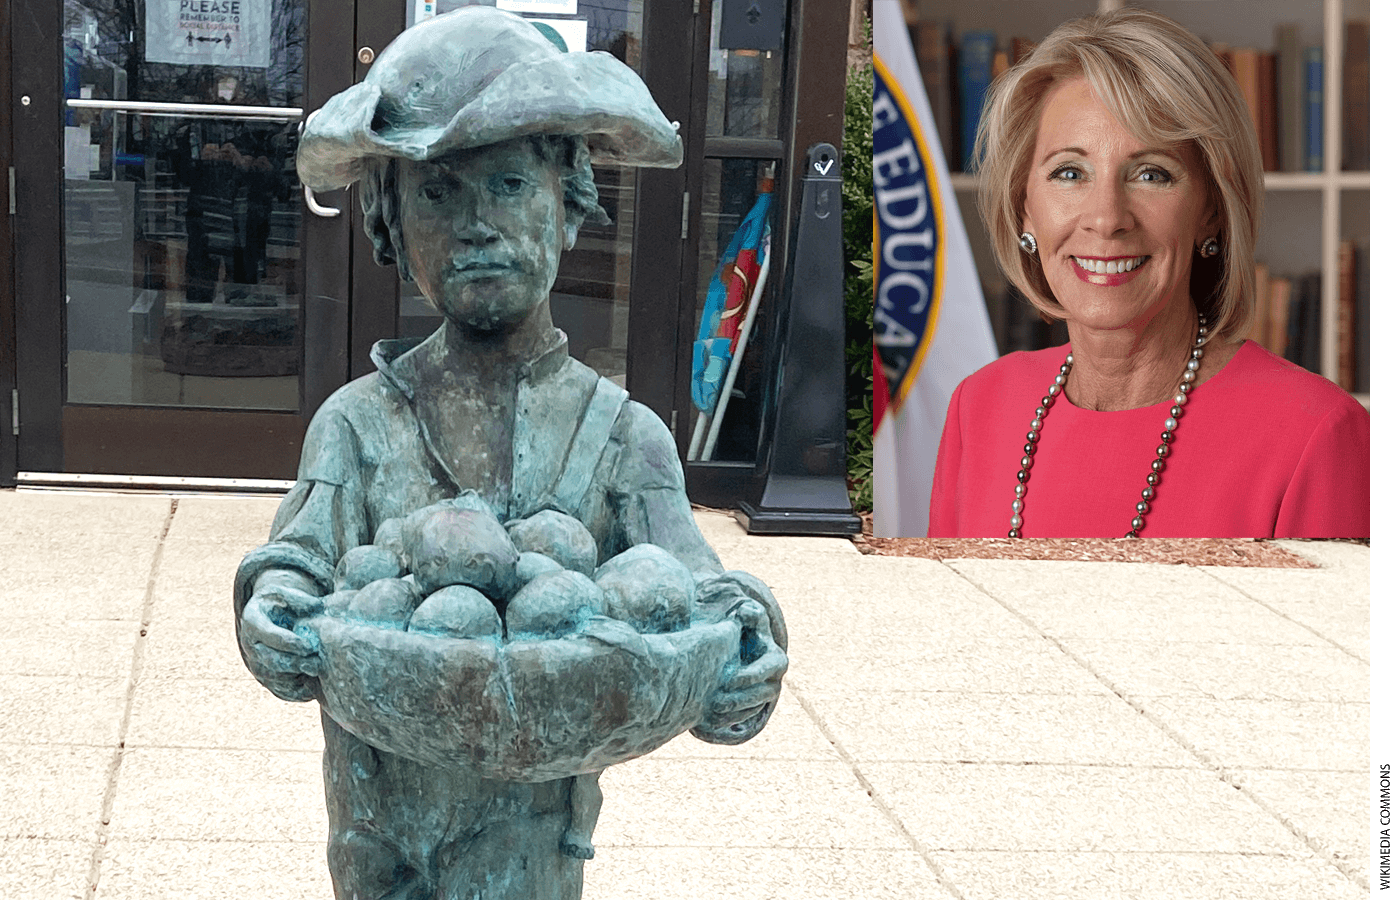 A statue of Johnny Appleseed welcomes visitors to the Massachusetts Visitor Center in Lancaster, Massachusetts. Inset: Former Secretary of Education Betsy DeVos.